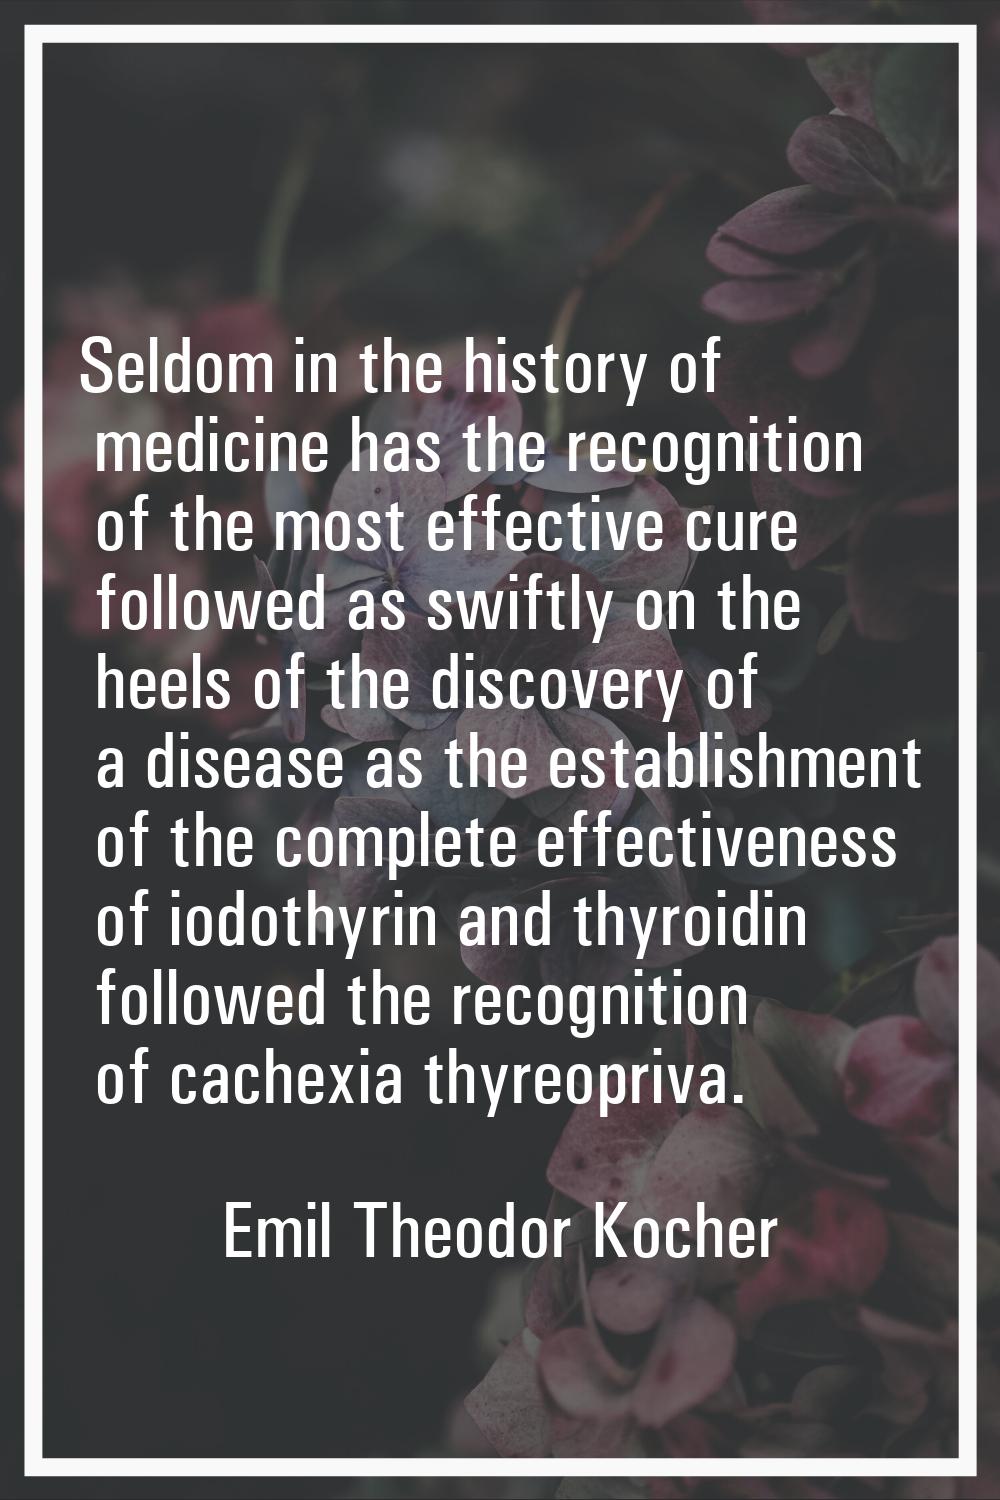 Seldom in the history of medicine has the recognition of the most effective cure followed as swiftl